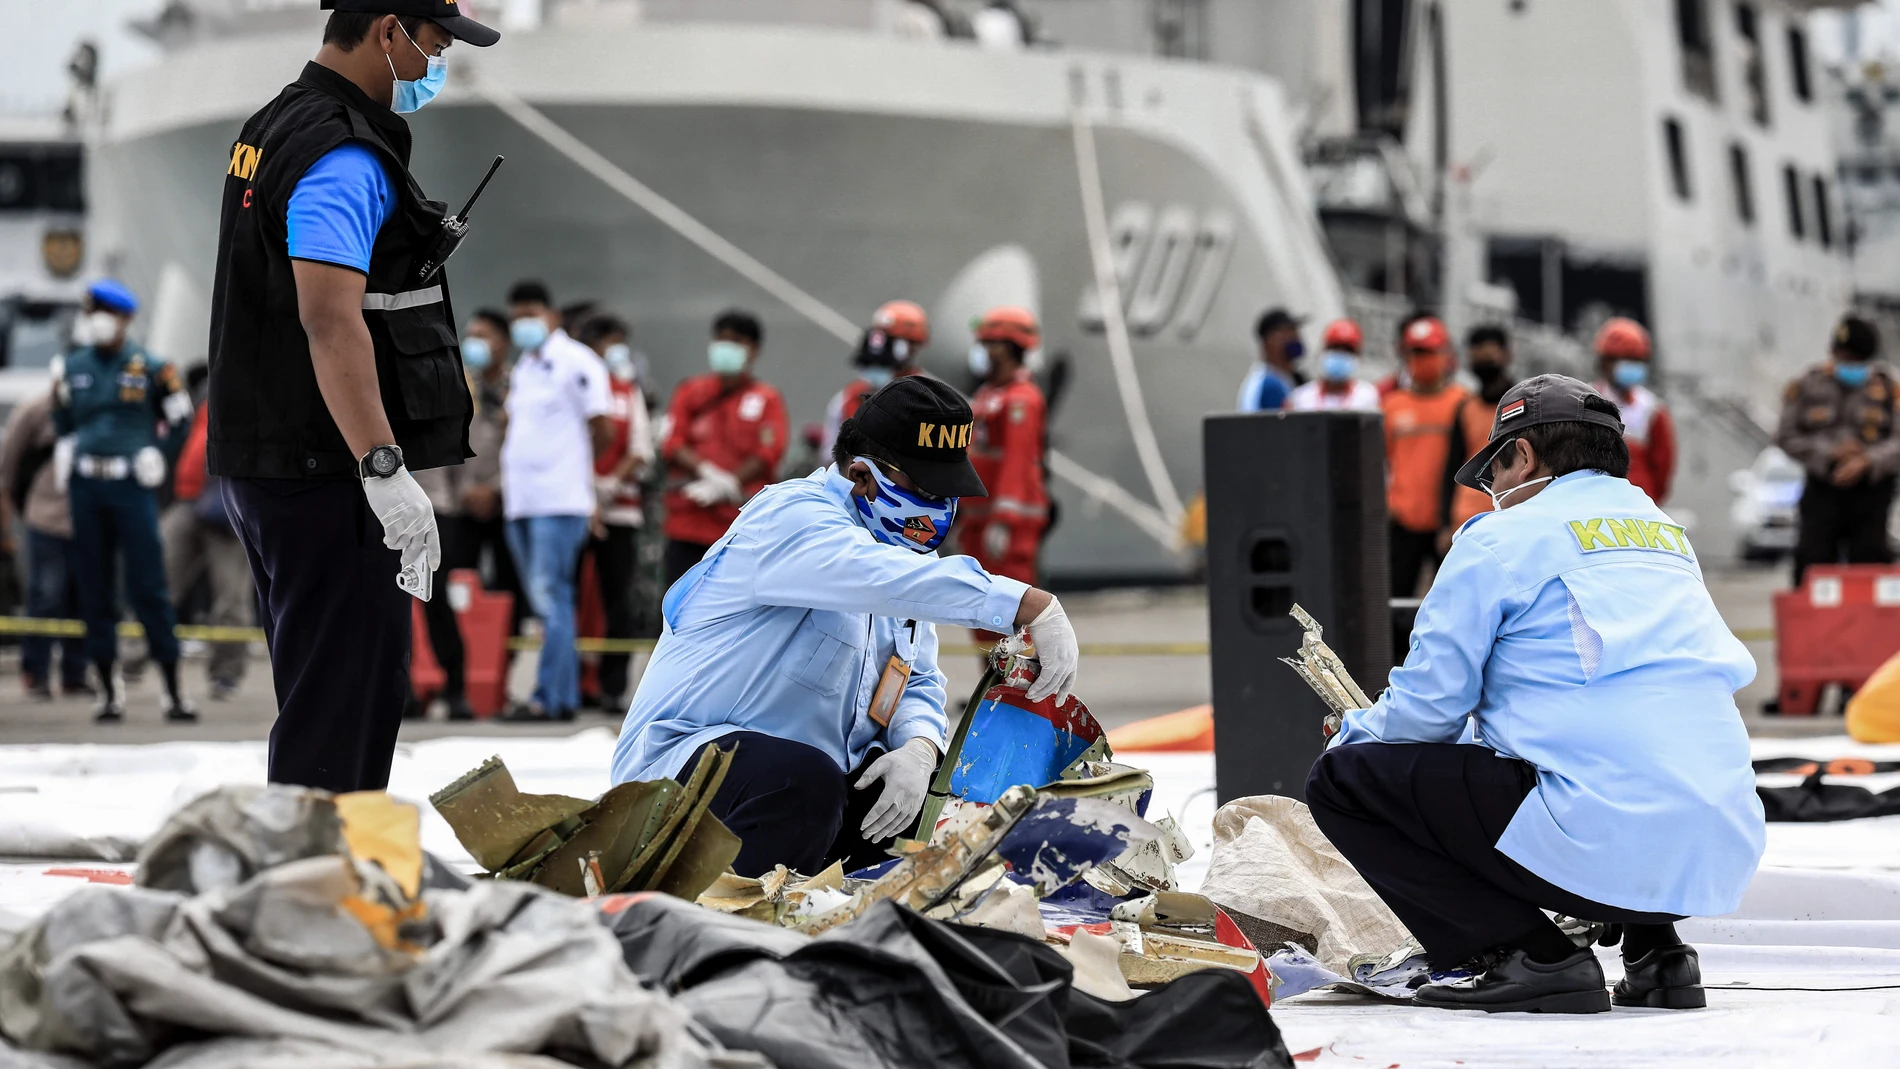 FILED - 10 January 2021, Indonesia, Jakarta: National Transportation Safety Committee and Disaster Victim Identification (DVI) police officers look through a bag of suspected debris near the crash site of the Sriwijaya Air flight SJ182 at Tanjung Priok port following the crash of a Boeing 737-500 passenger plane with 62 people on board. Photo: Risa Krisadhi/SOPA Images via ZUMA Wire/dpaRisa Krisadhi/SOPA Images via ZU / DPA10/01/2021 ONLY FOR USE IN SPAIN